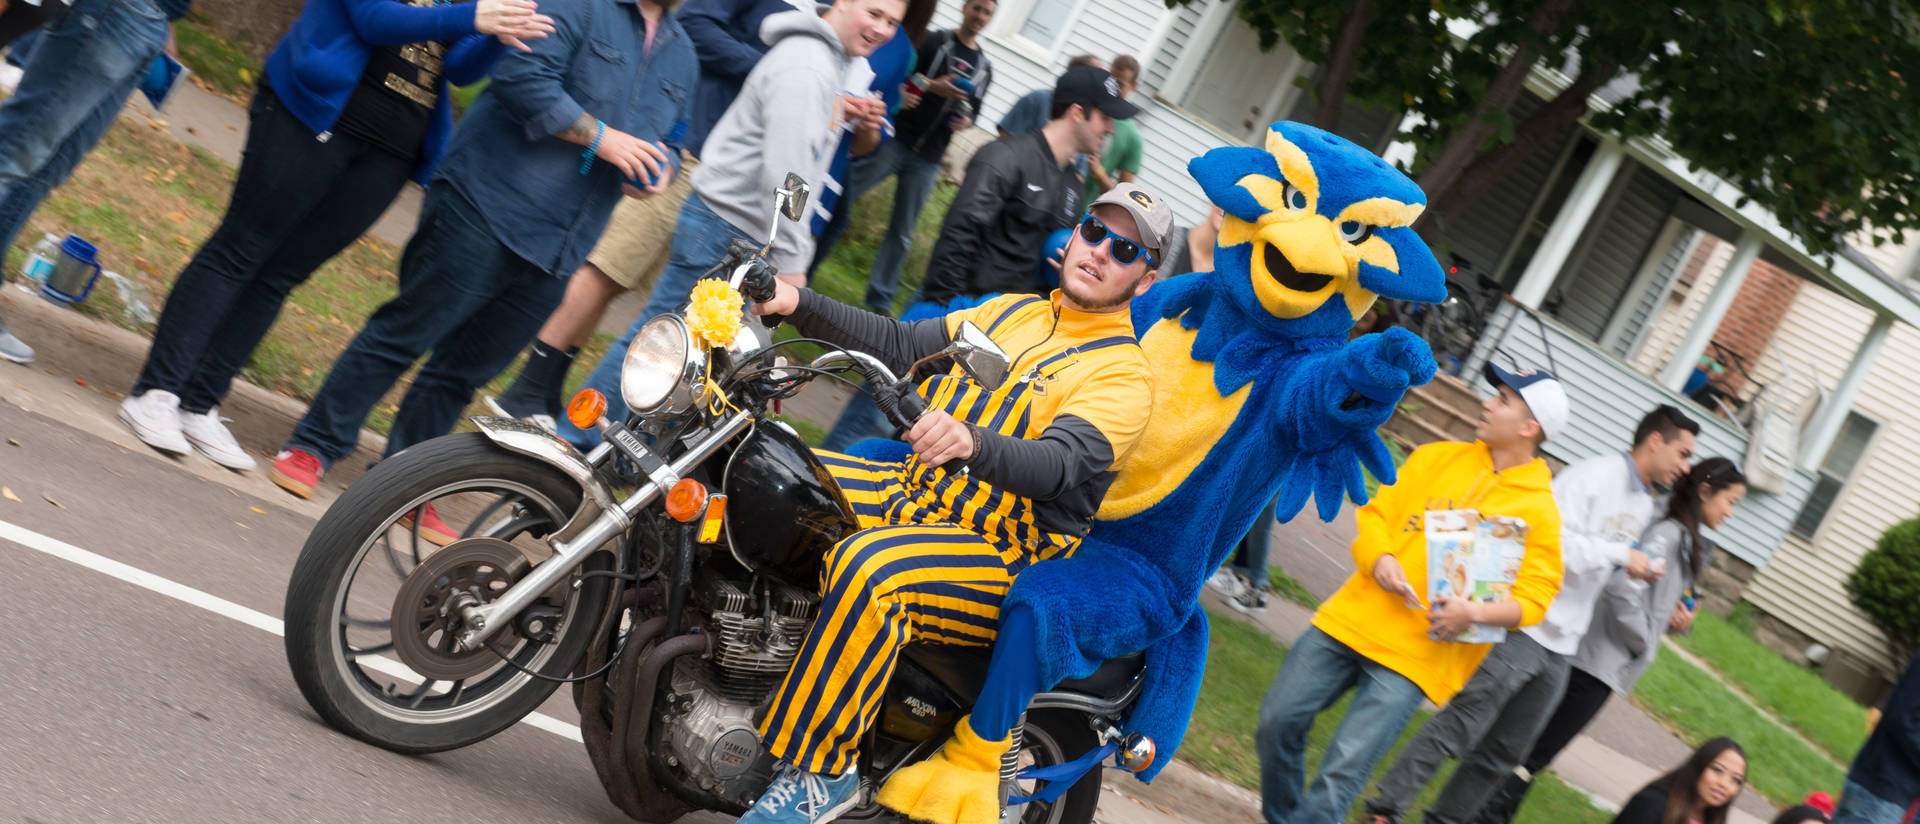 Homecoming Parade, Blu on a motorcycle